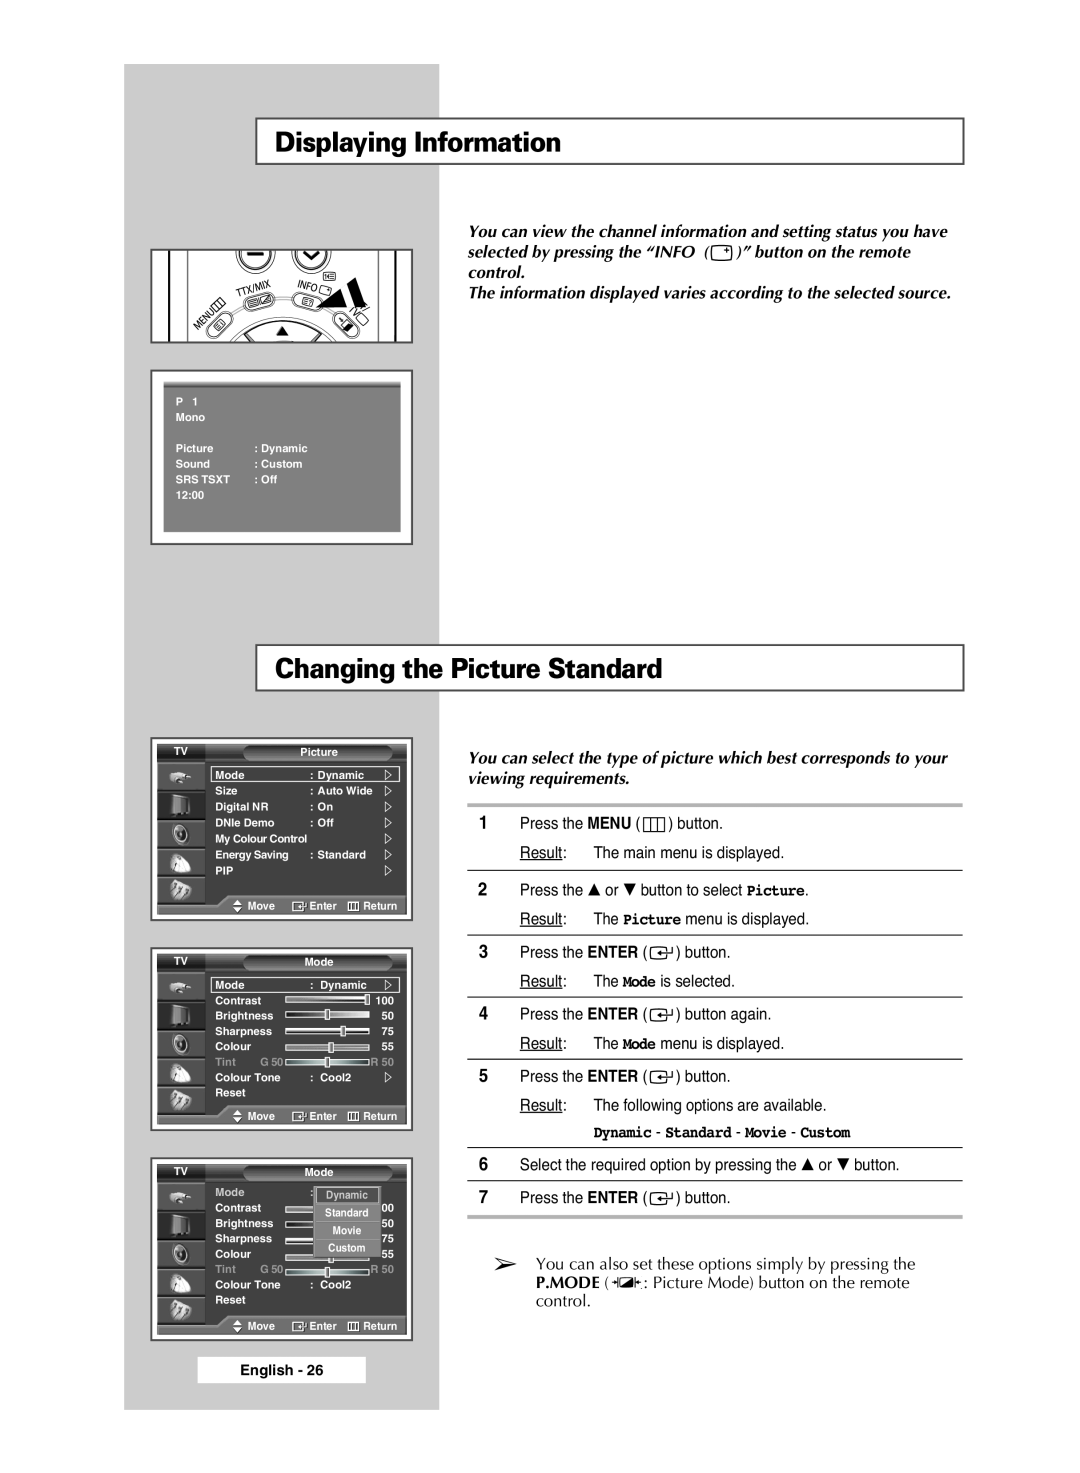 Samsung PS-42S5S manual Displaying Information, Changing the Picture Standard, Dynamic - Standard - Movie - Custom 